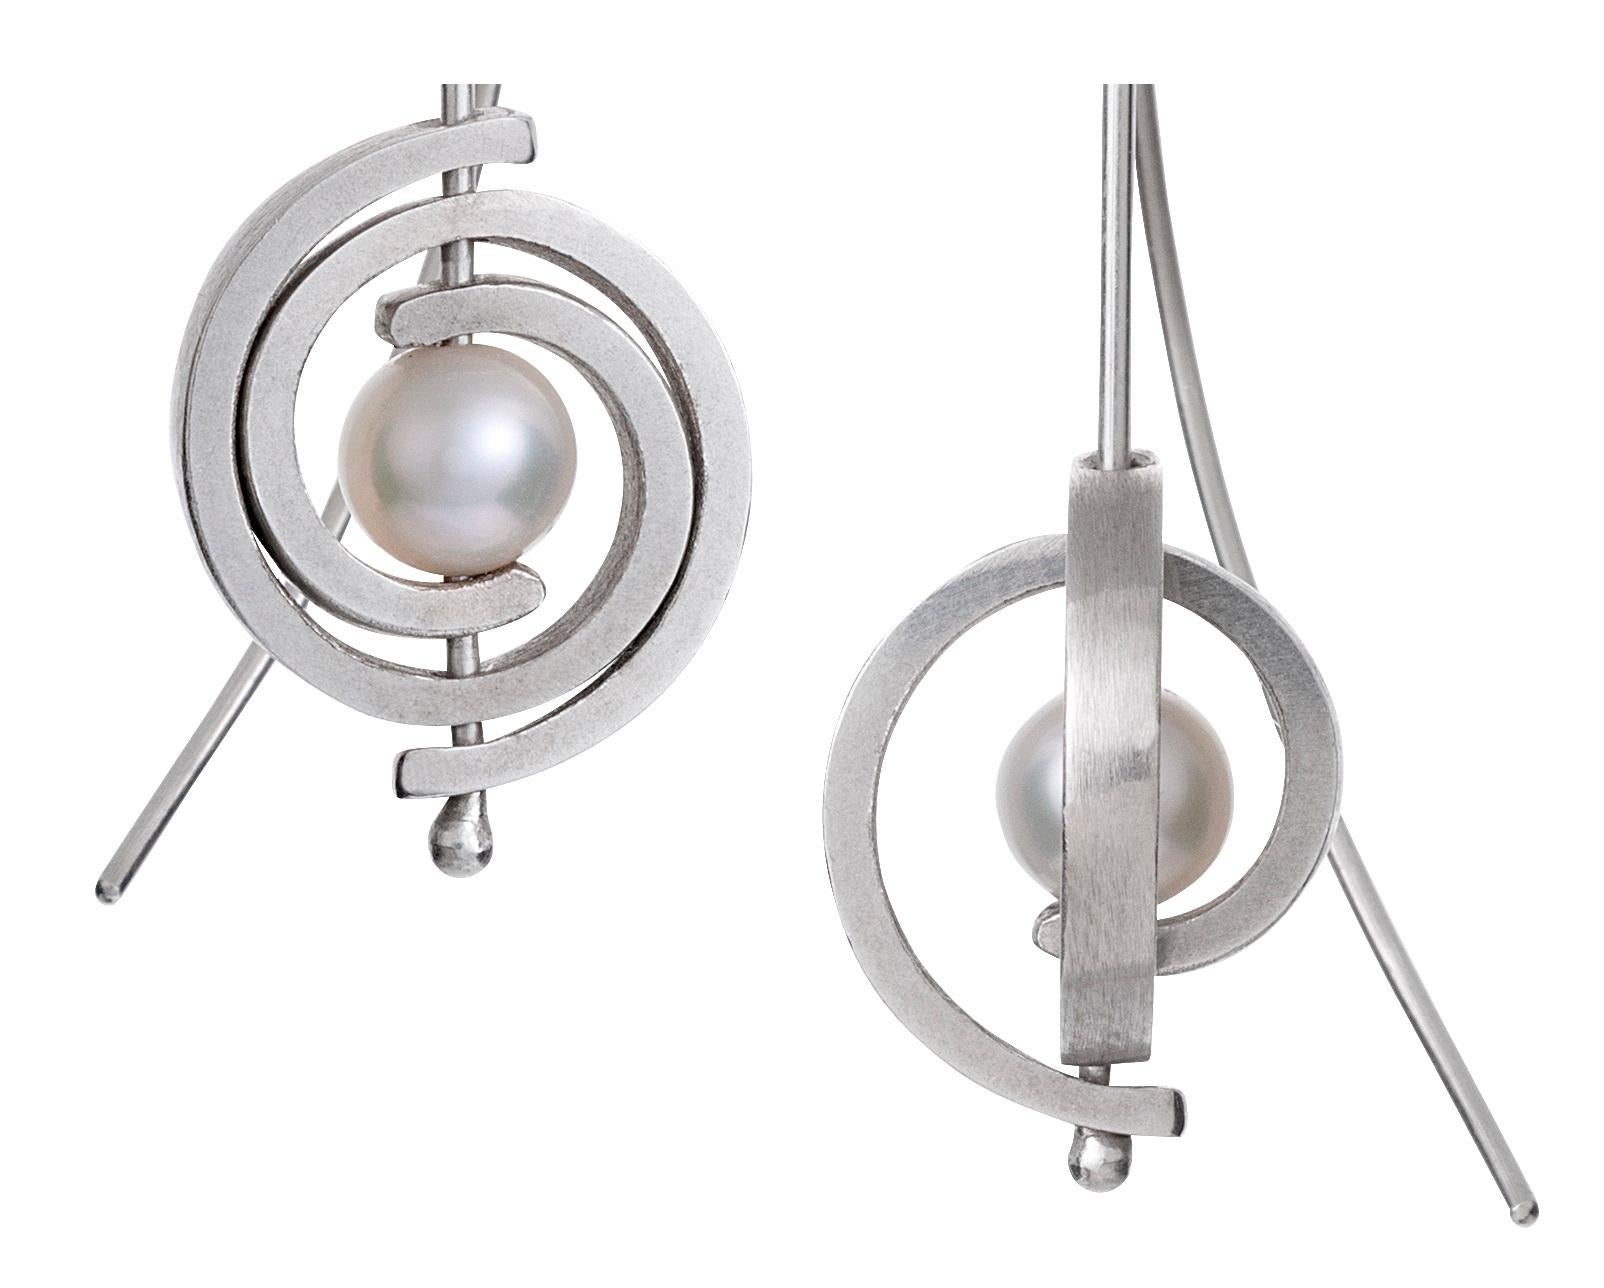 From the Orbit collections - the Petite Spiral Dangle Earrings are a contemporary classic earring.  They are like little luminous planets with rings. Dangling 1.5